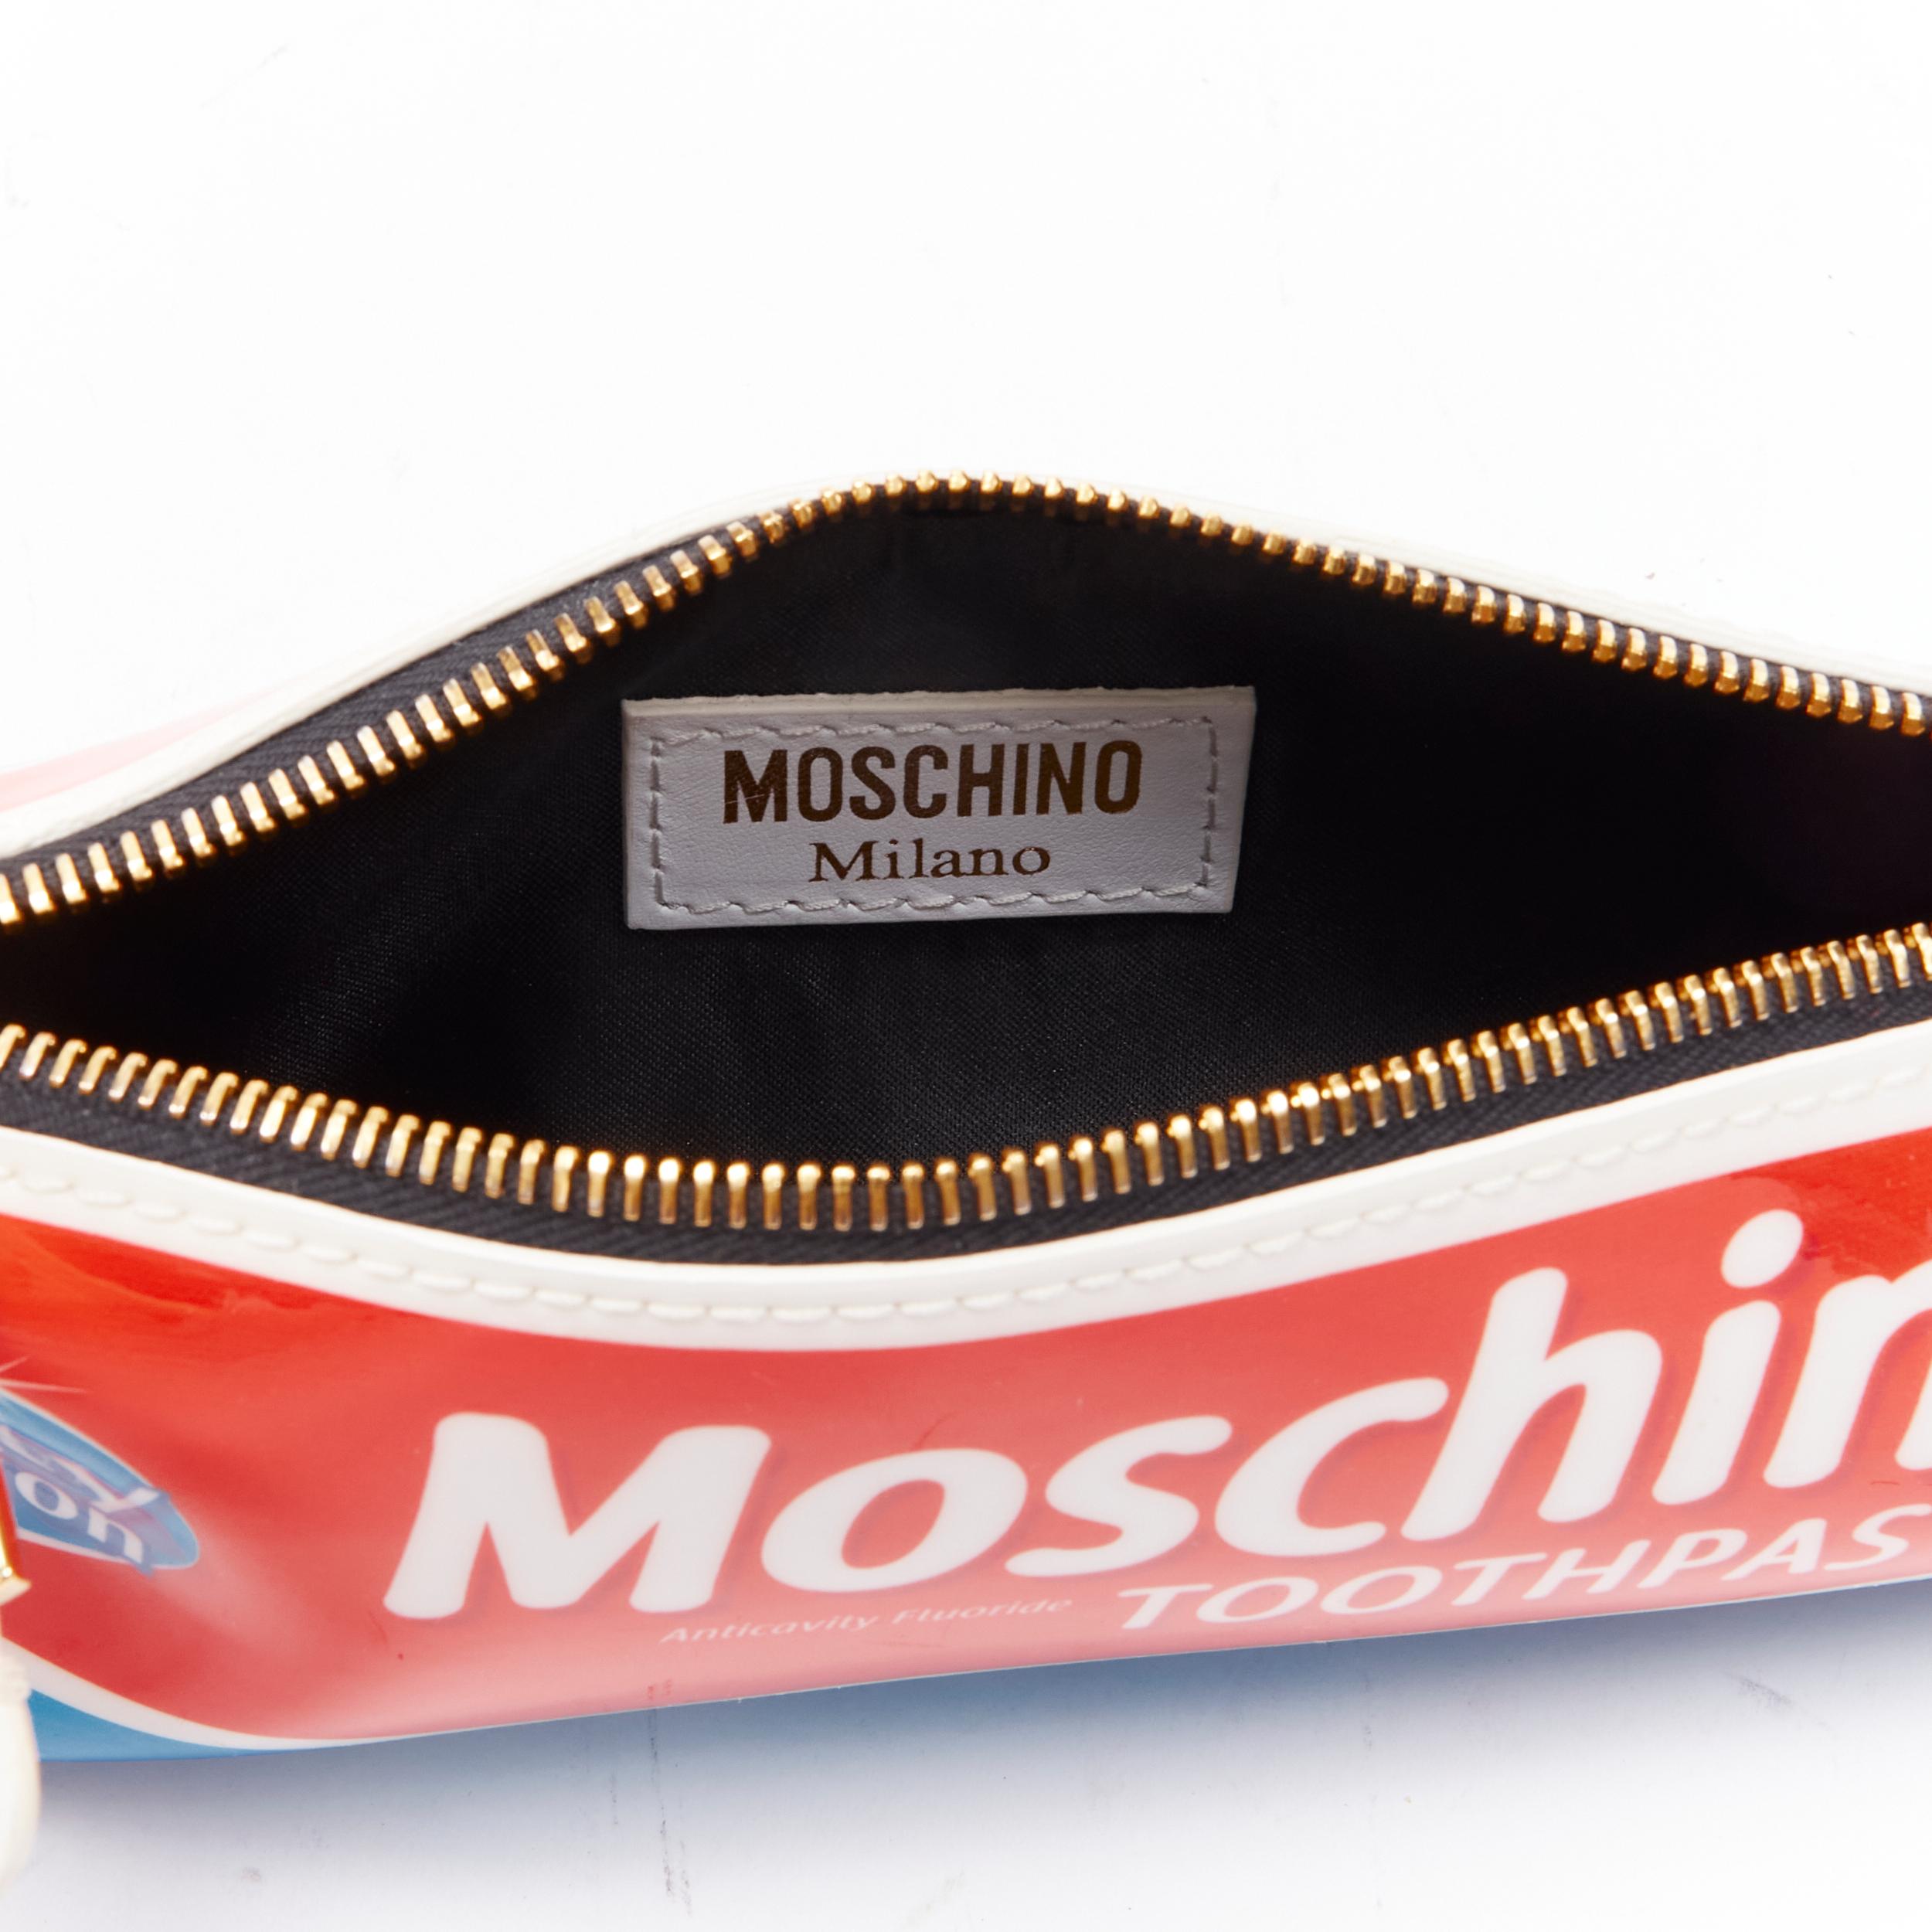 Women's rare MOSCHINO Couture! 2019 Runway Toothpaste tube XL zip back clutch bag